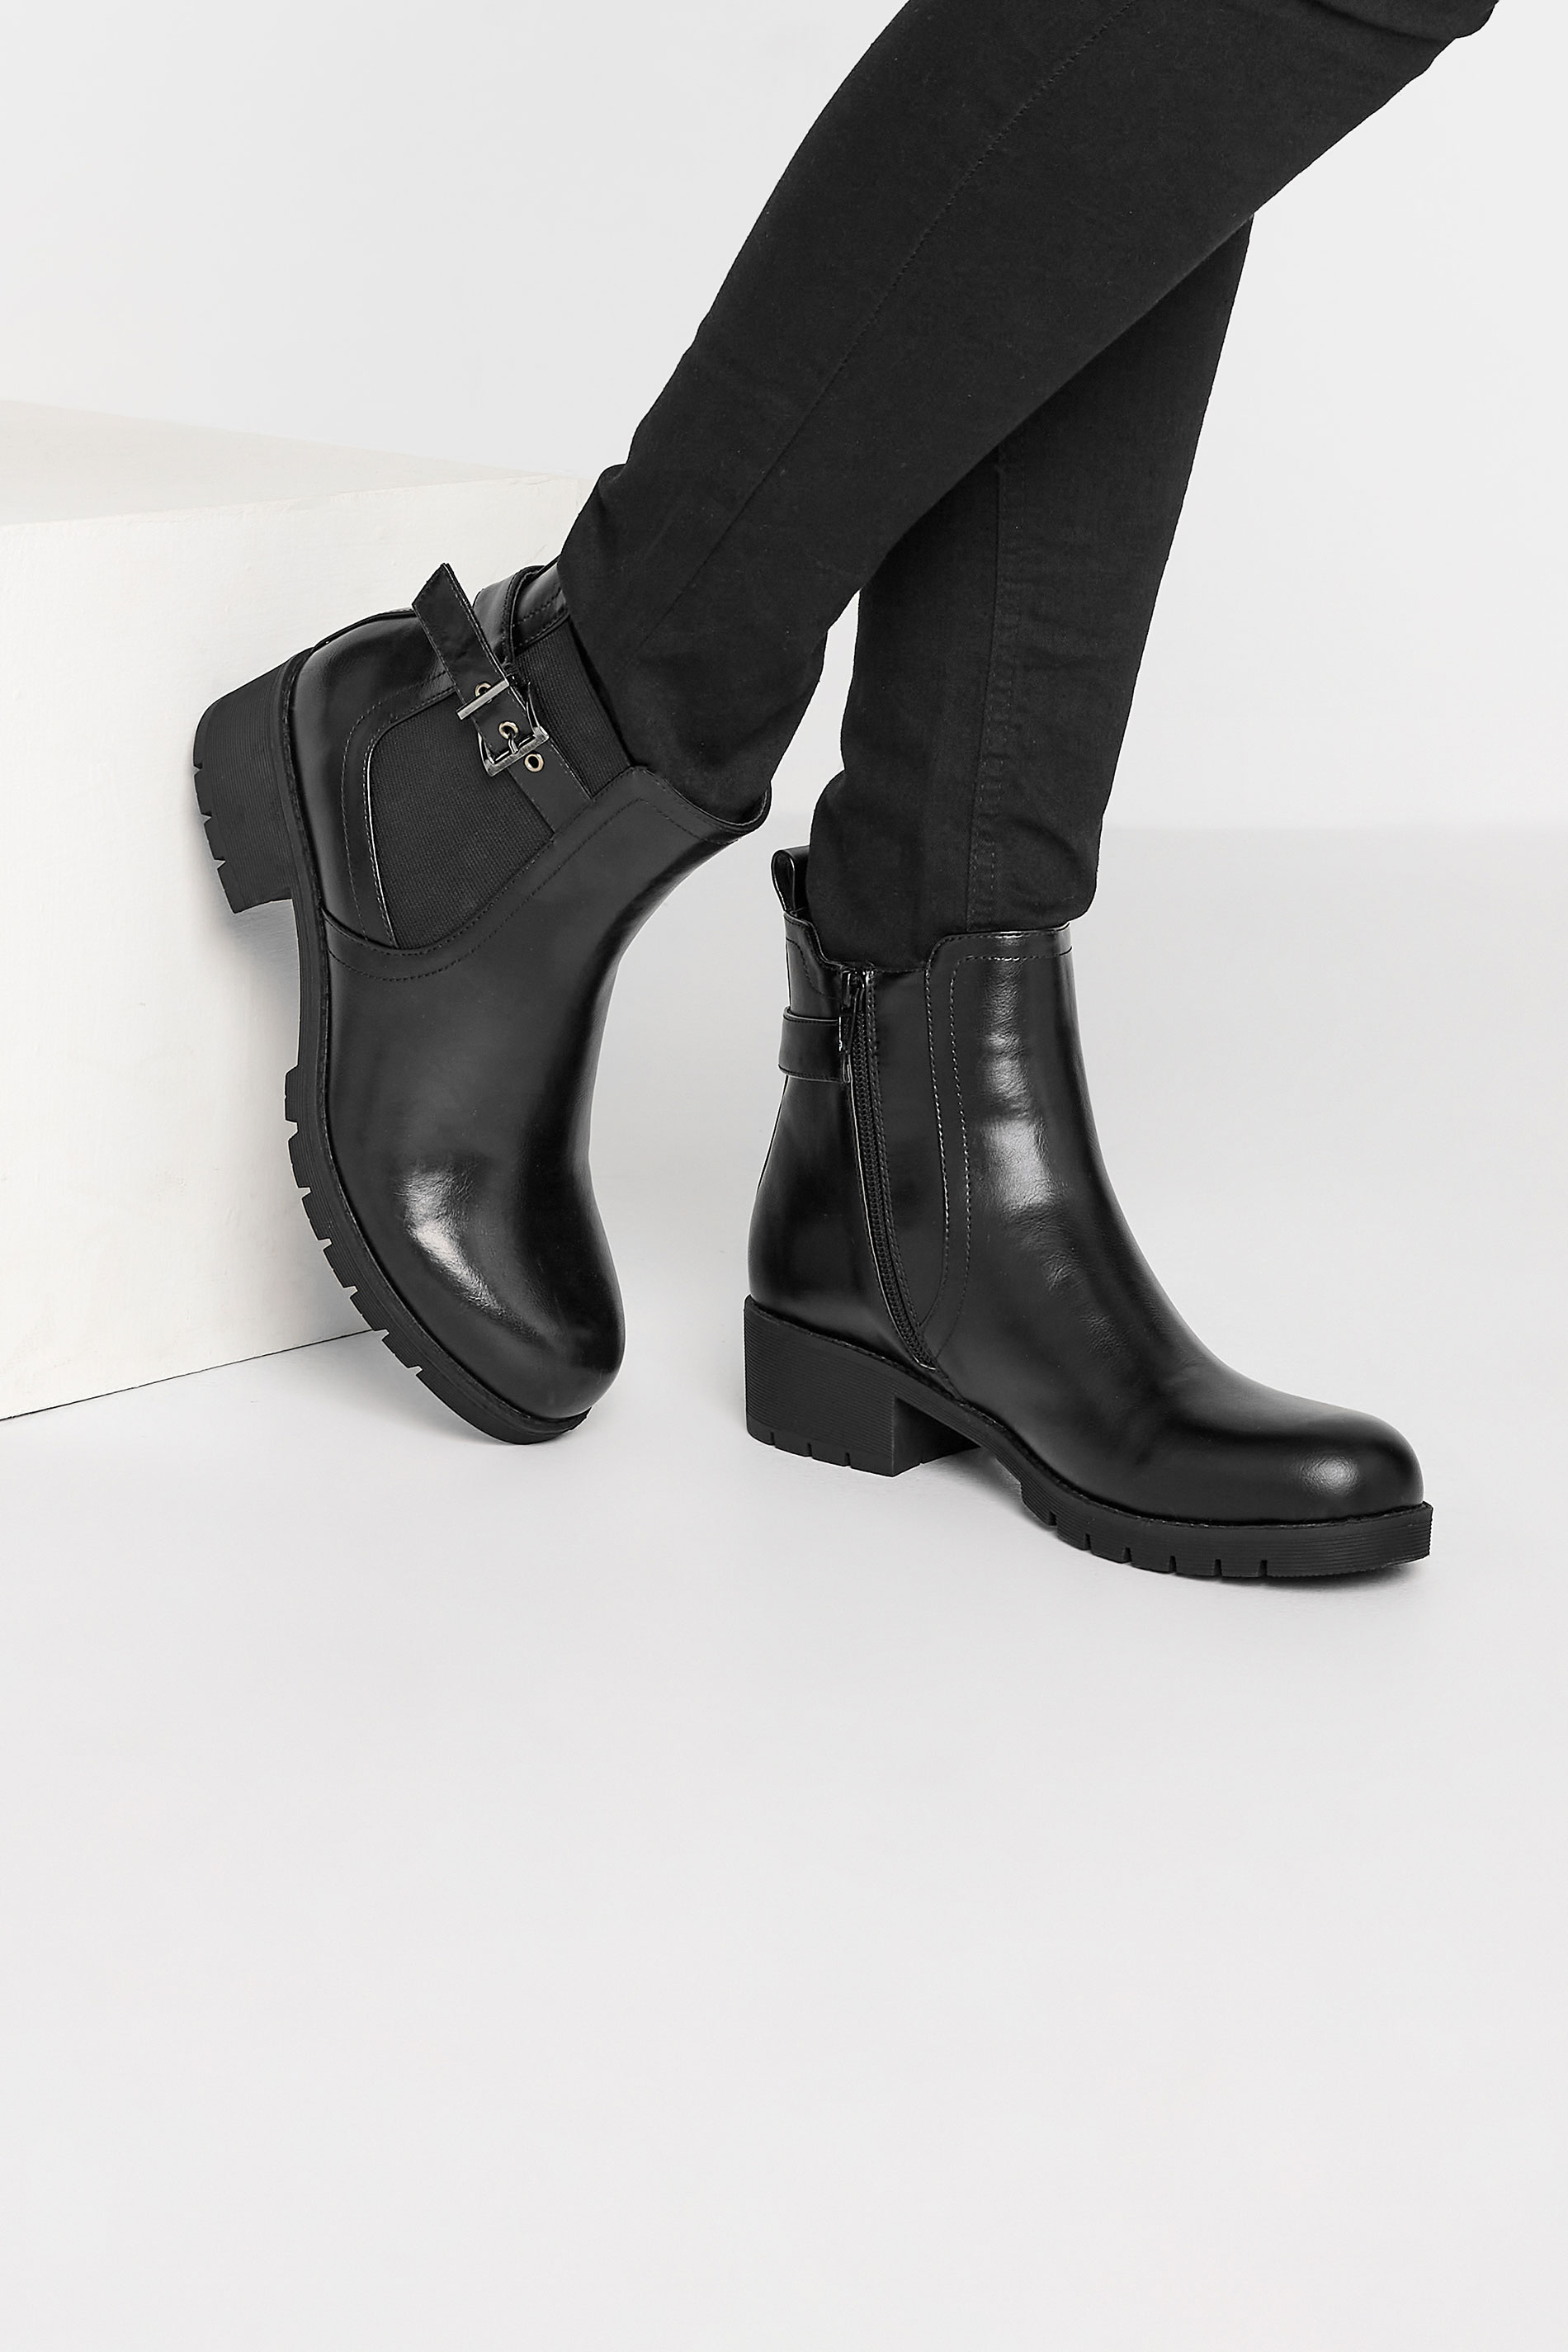 LTS Black Buckle Ankle Boots In Standard D Fit 1